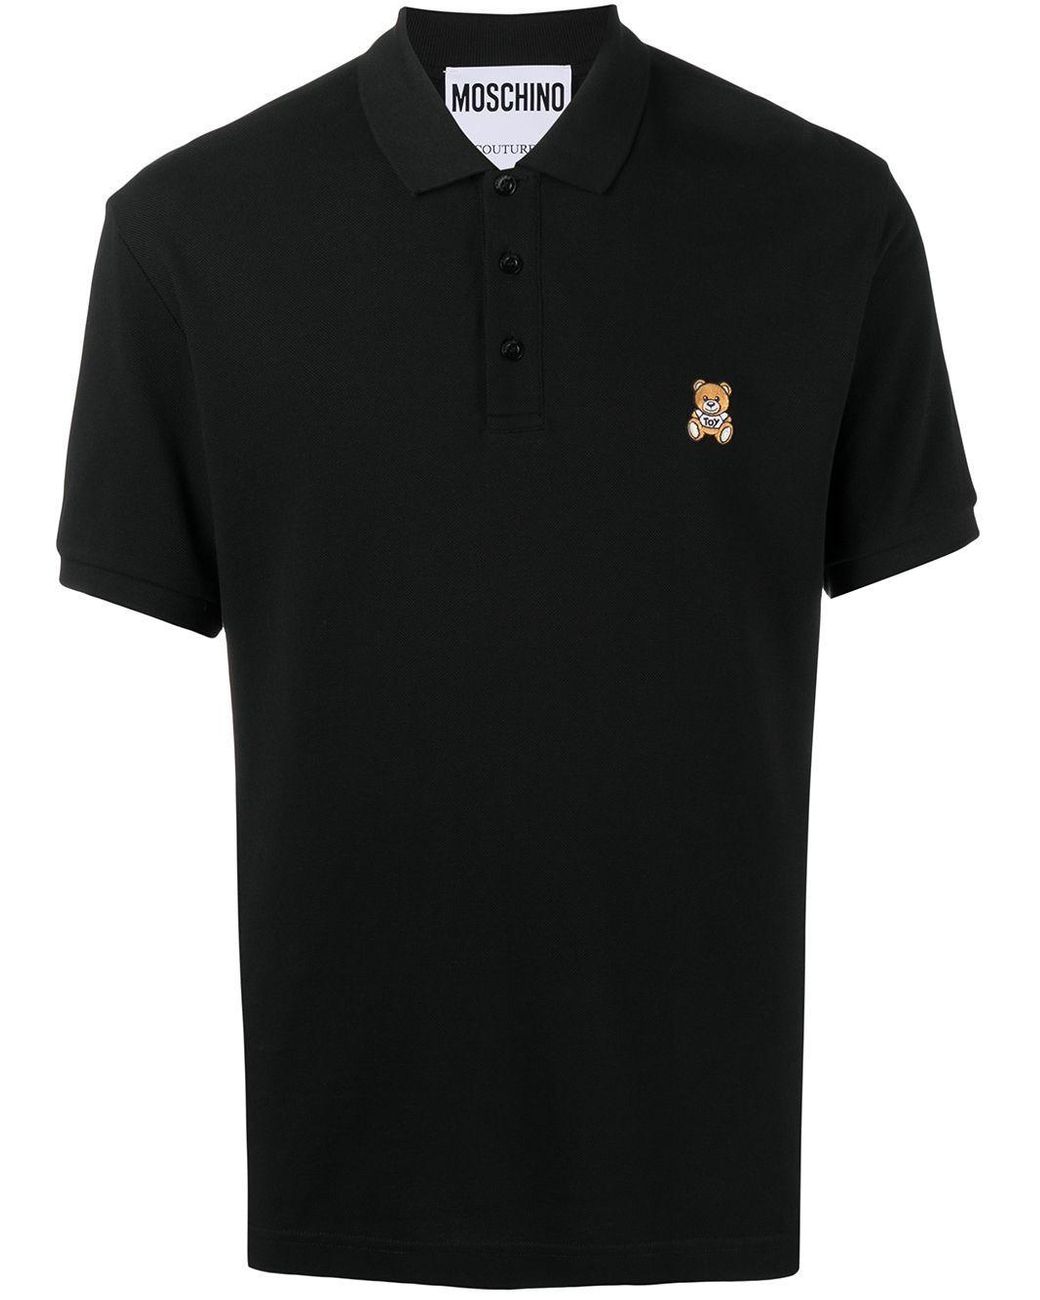 Moschino Cotton Polo Shirt in Black for Men - Lyst